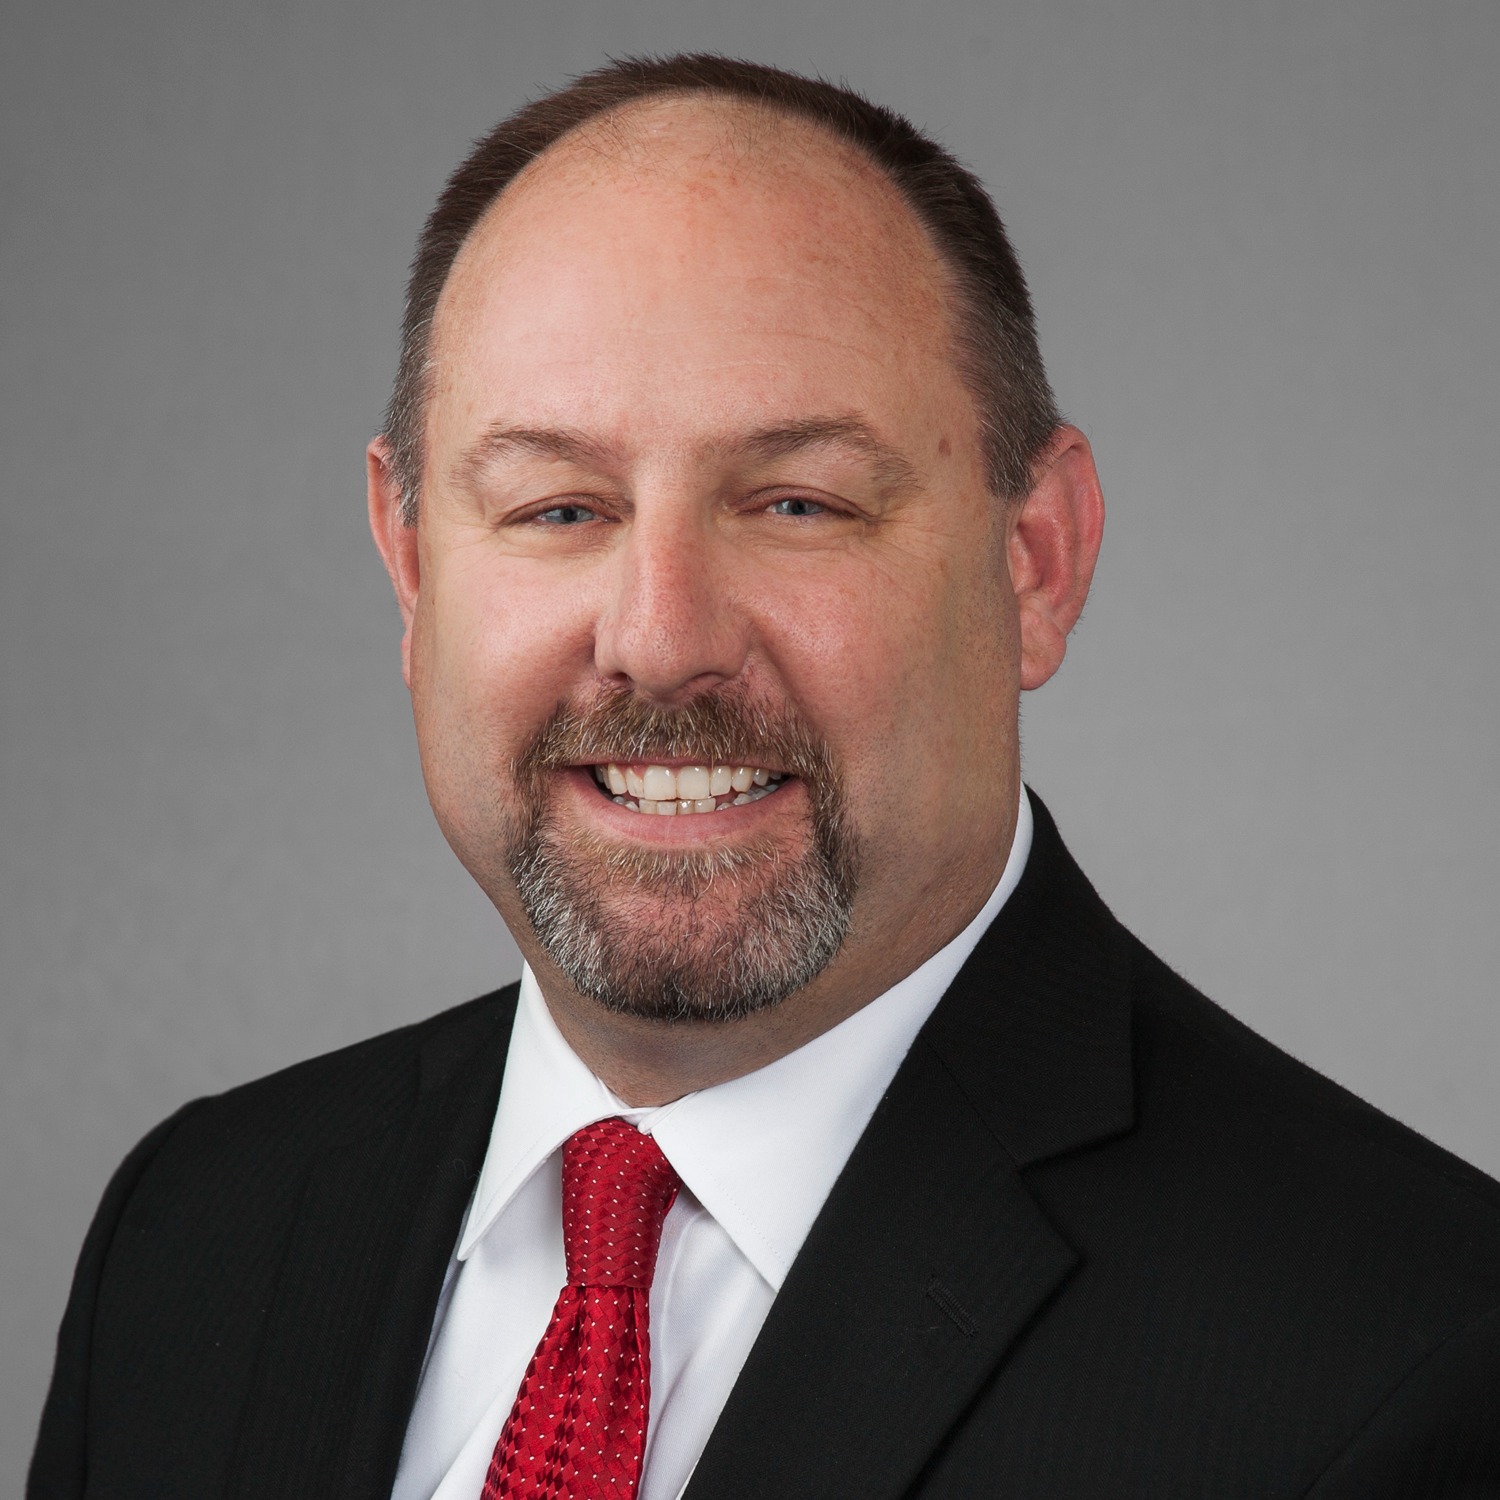 Mark BeMent Named Finalist for Dallas CIO of the Year – Jackson Walker